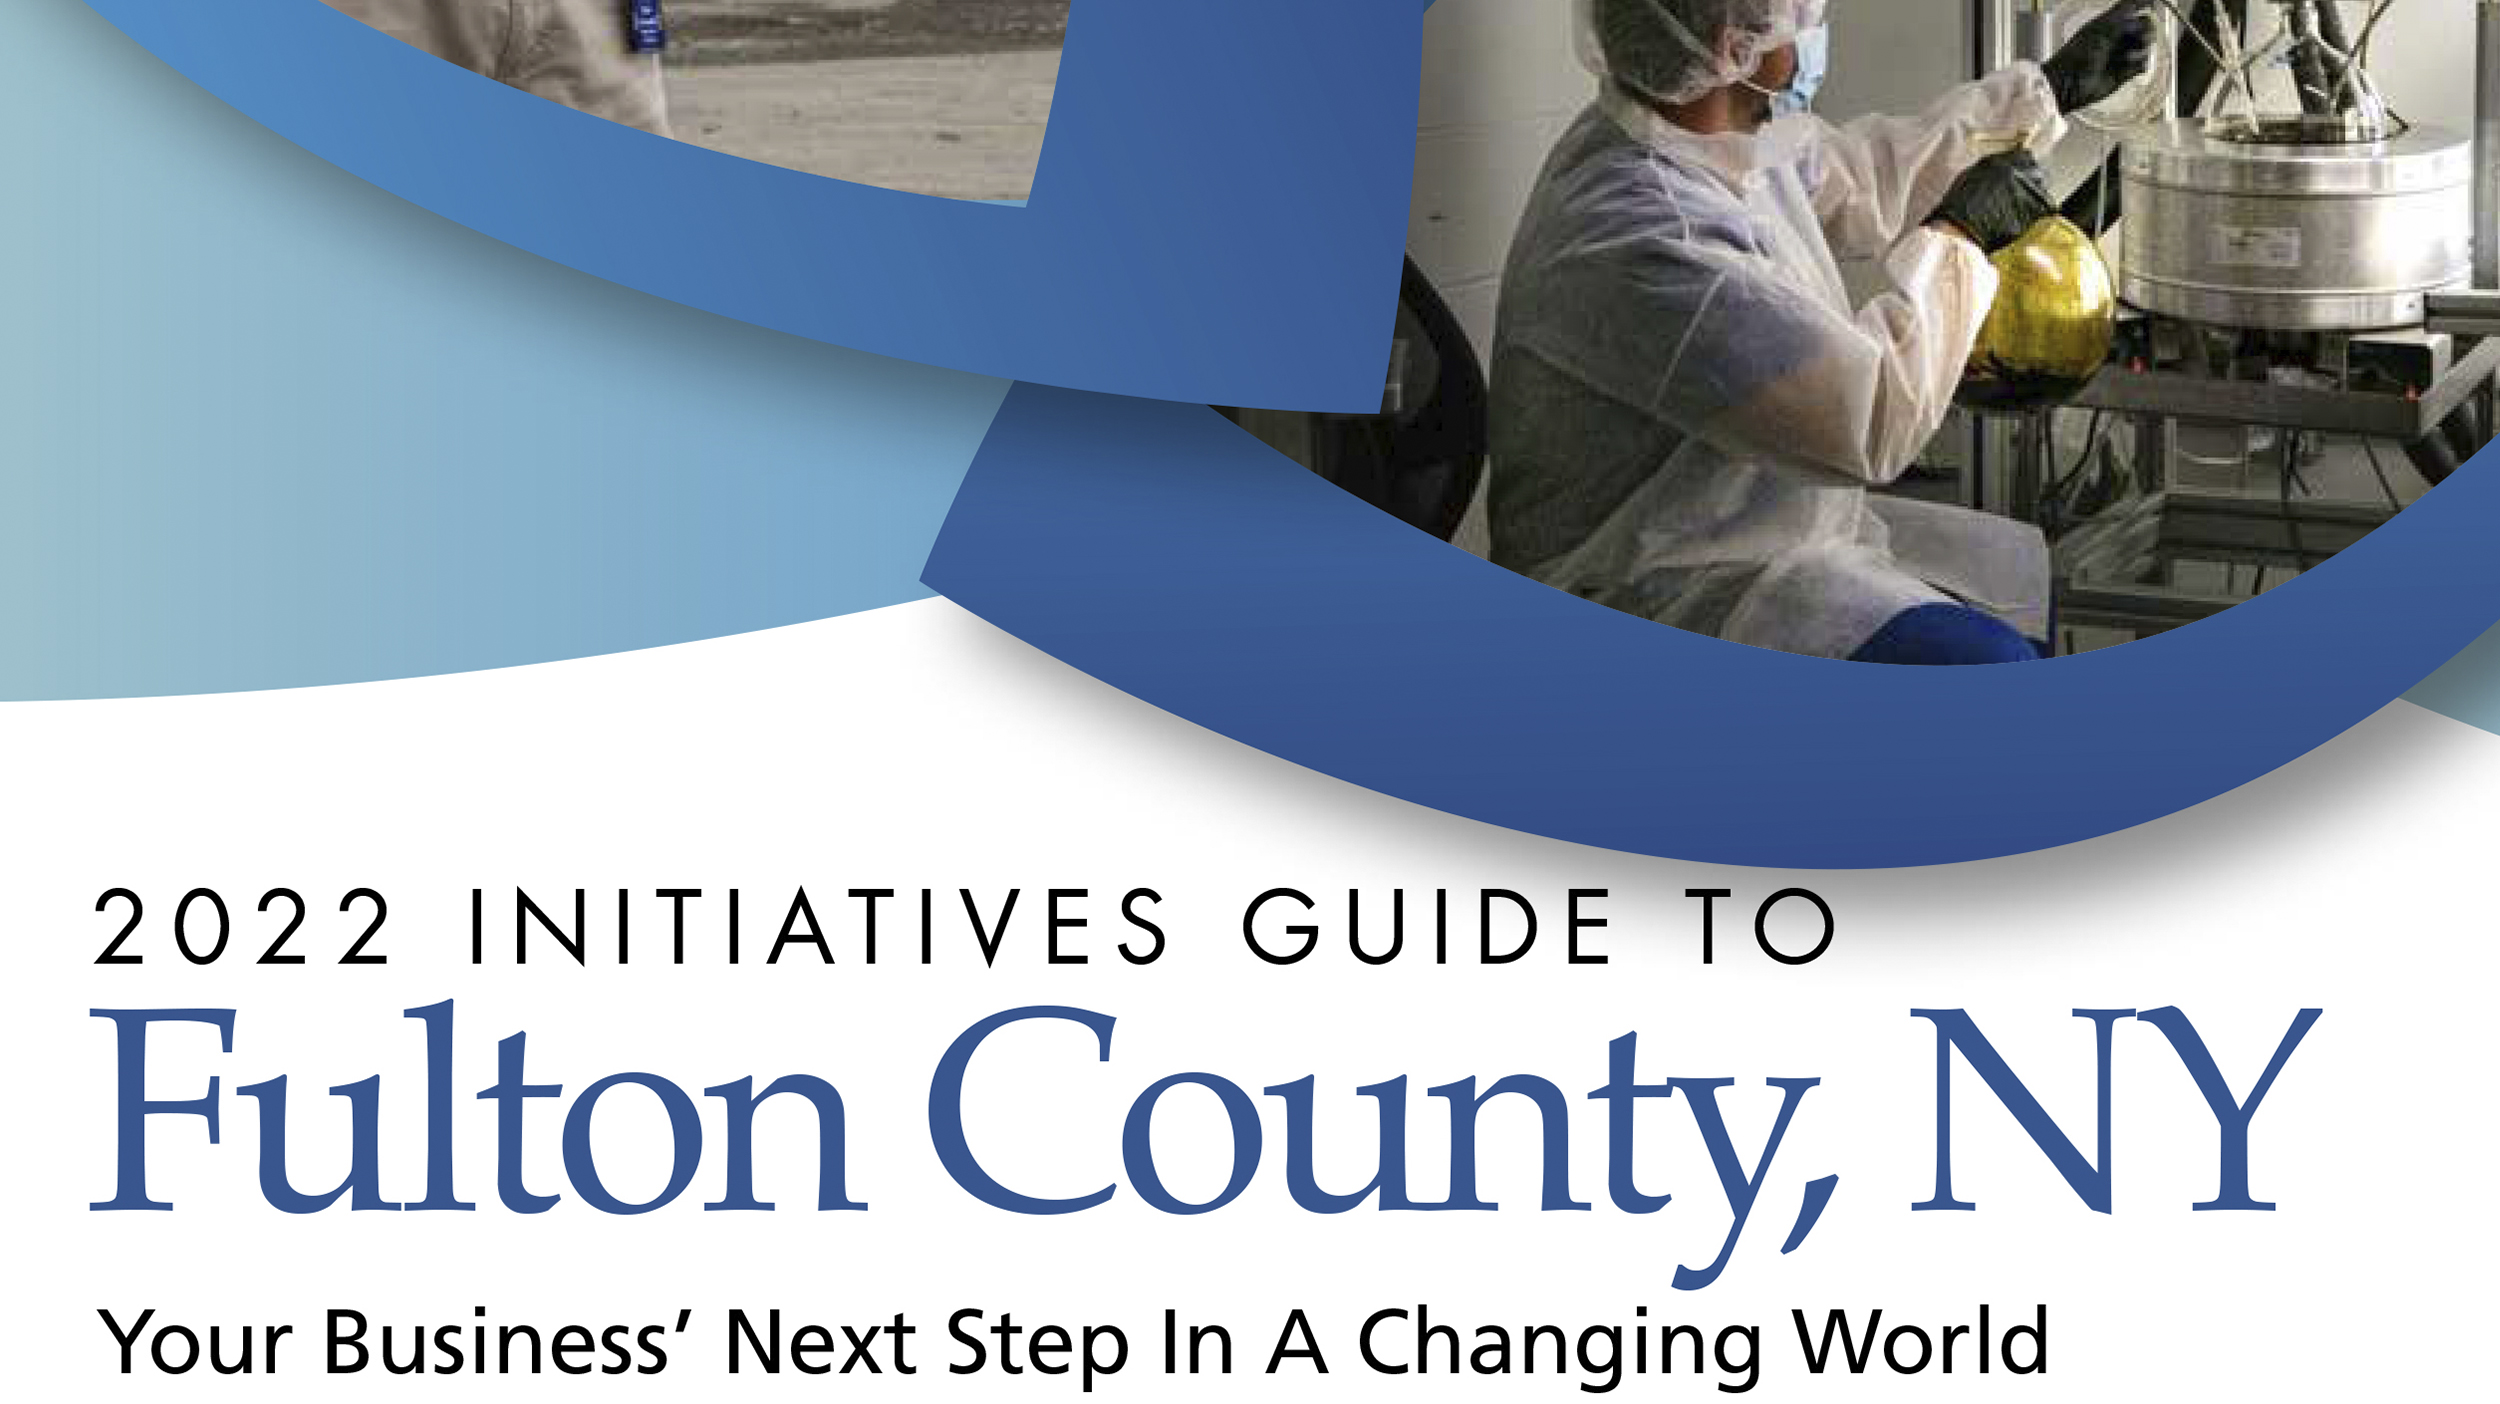 2022 Initiatives Guide to Fulton County